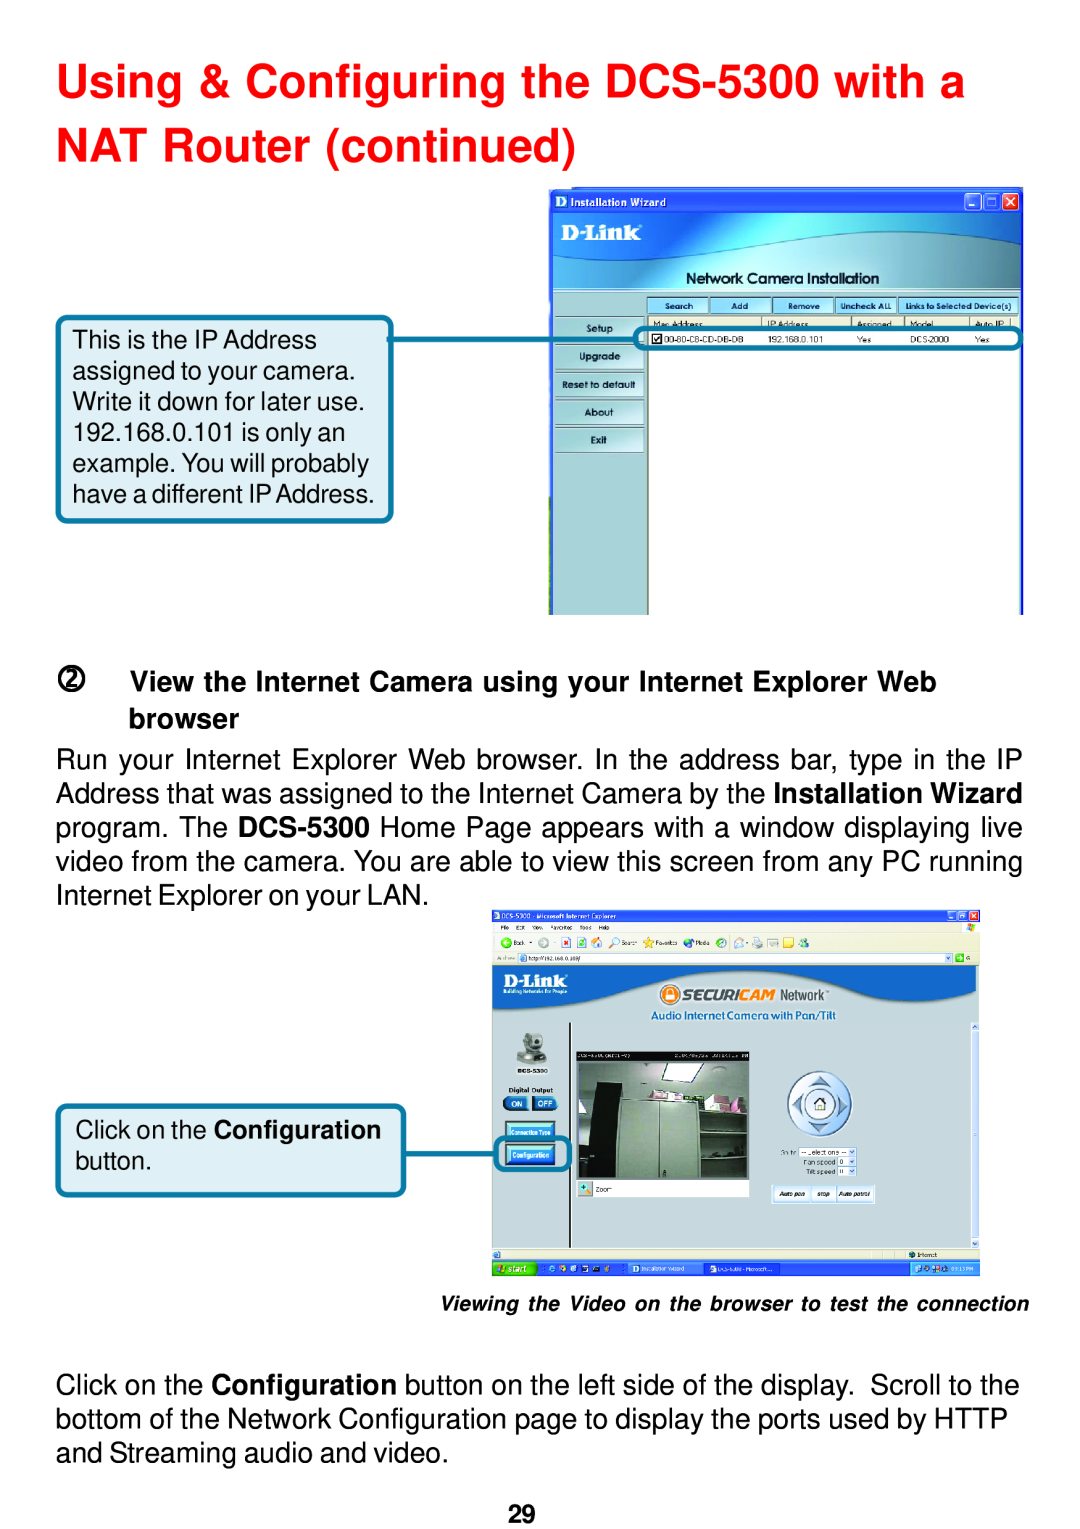 D-Link manual Using & Configuring the DCS-5300 with a NAT Router continued 